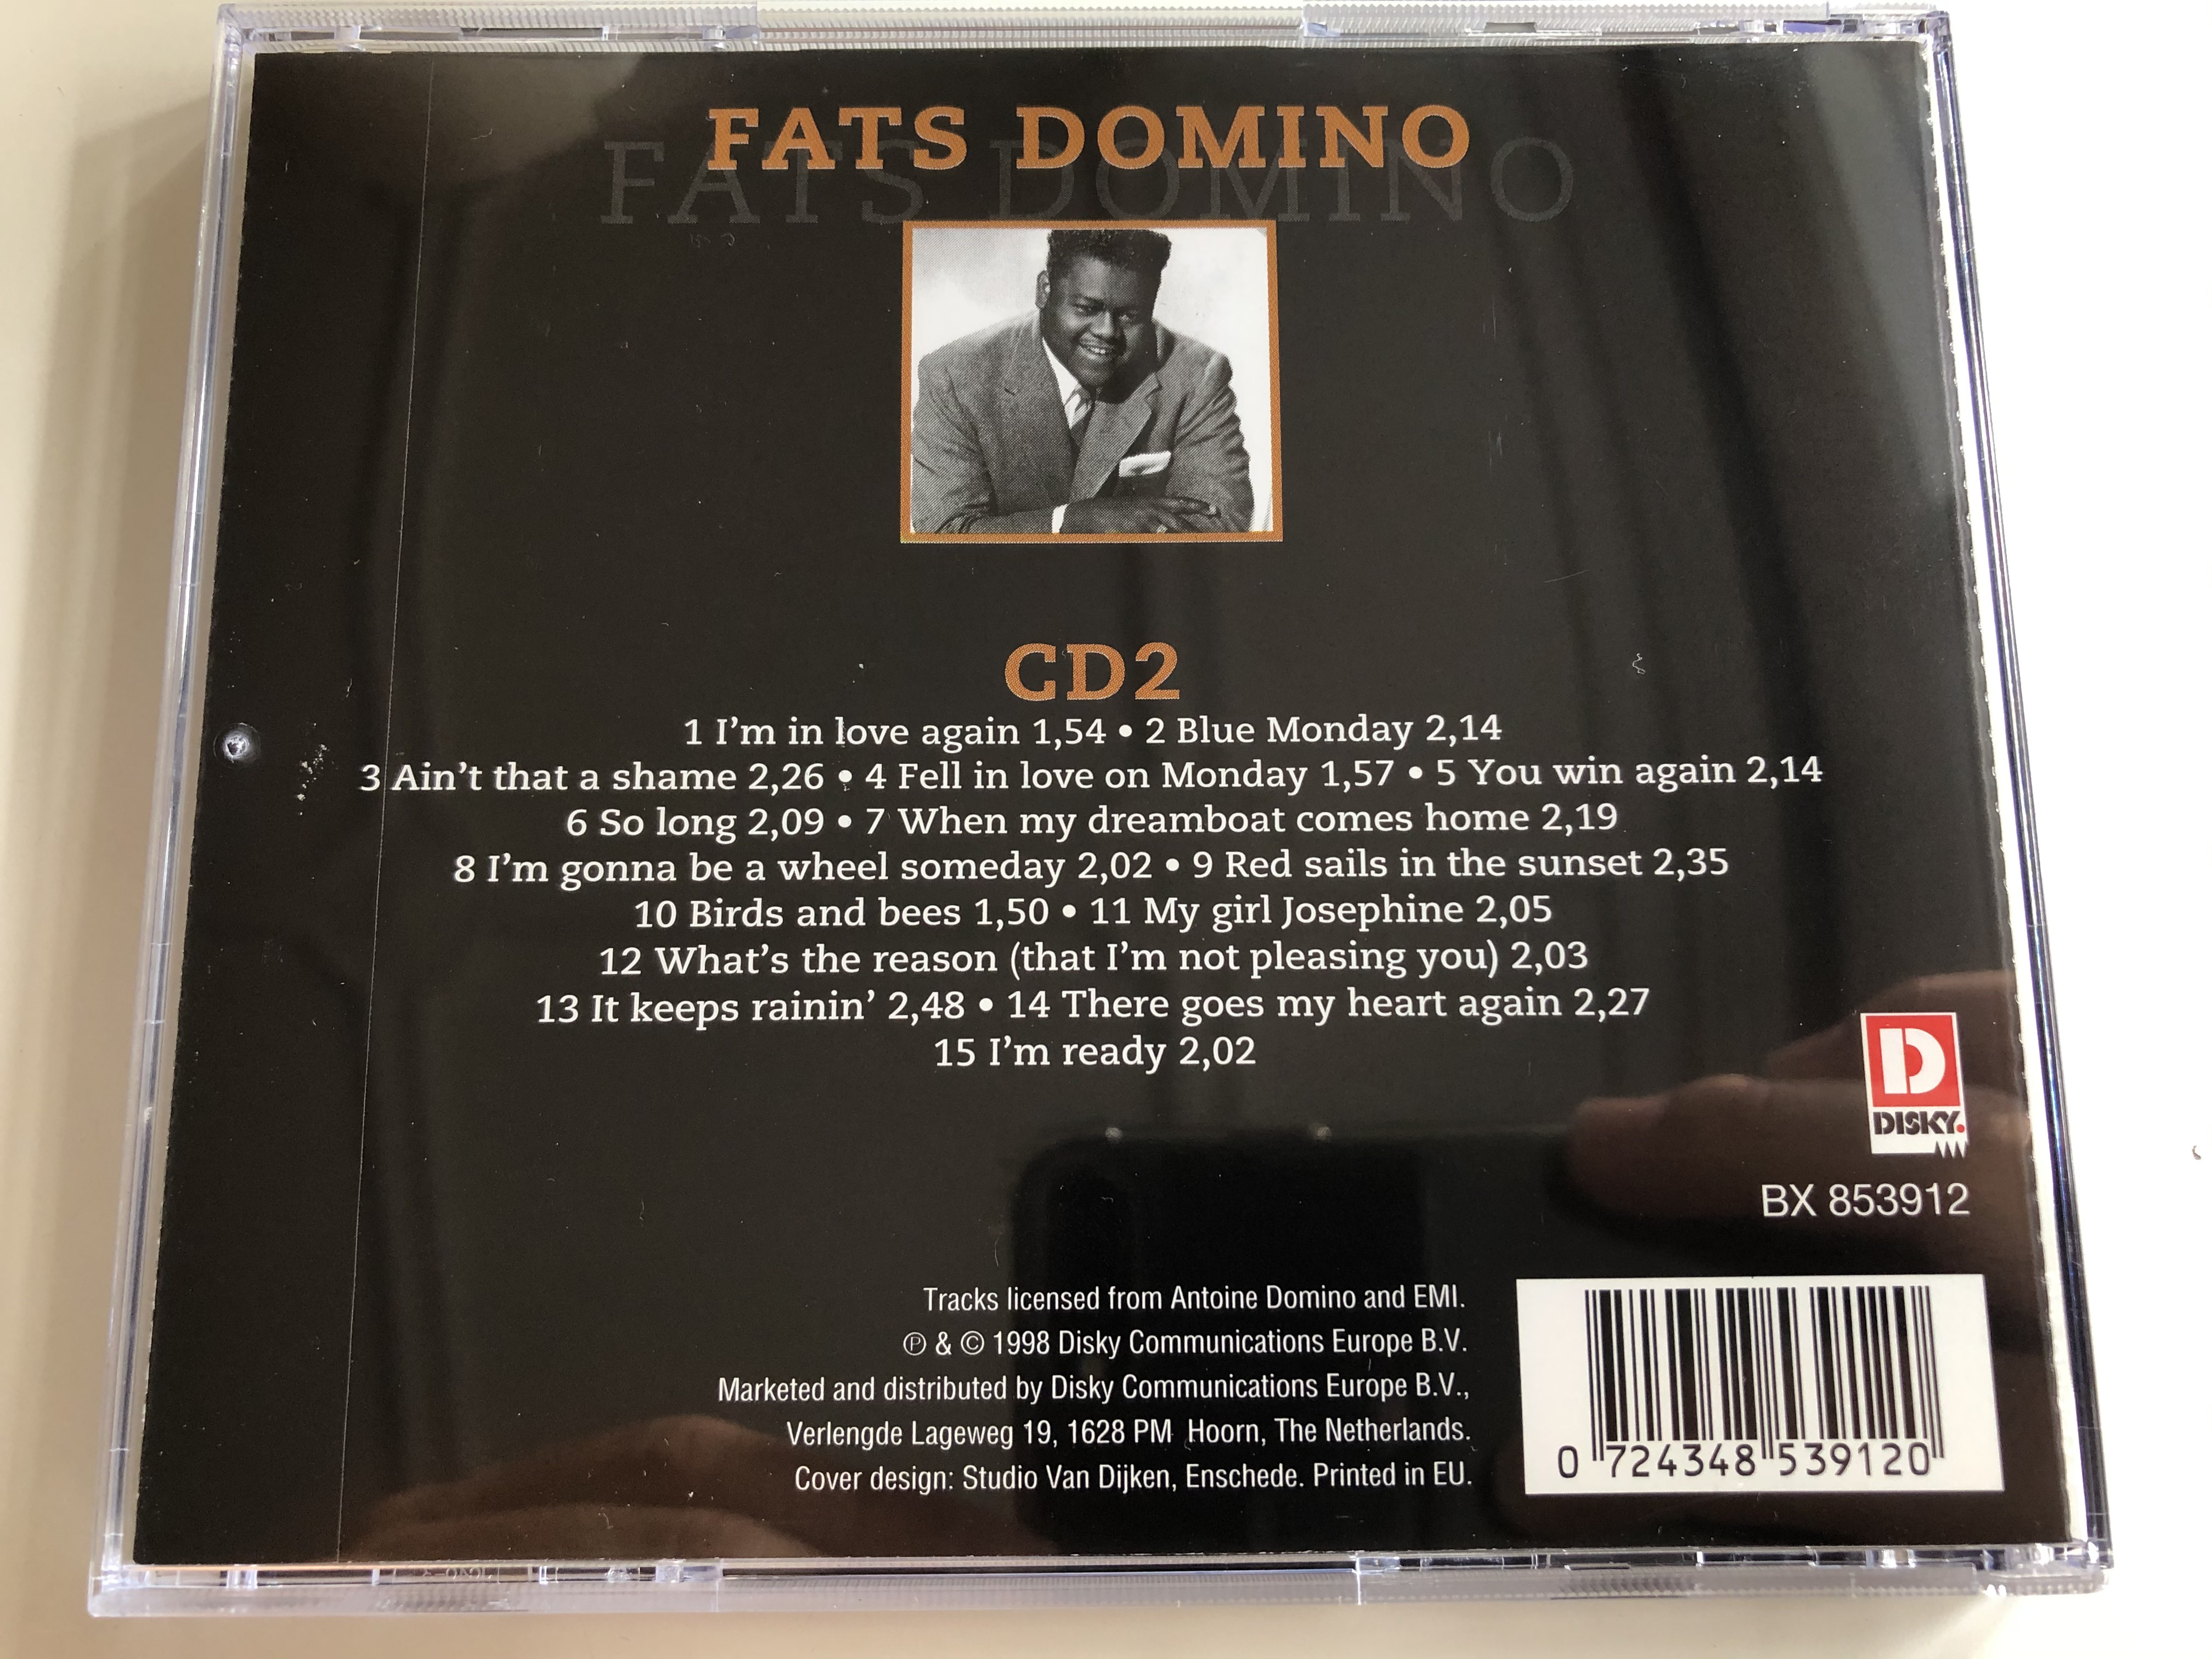 fats-domino-original-gold-cd-2-my-girl-josephine-red-sails-in-the-sunset-ain-t-that-a-shame-there-goes-my-heart-again-disky-audio-cd-1998-bx-853912-4-.jpg